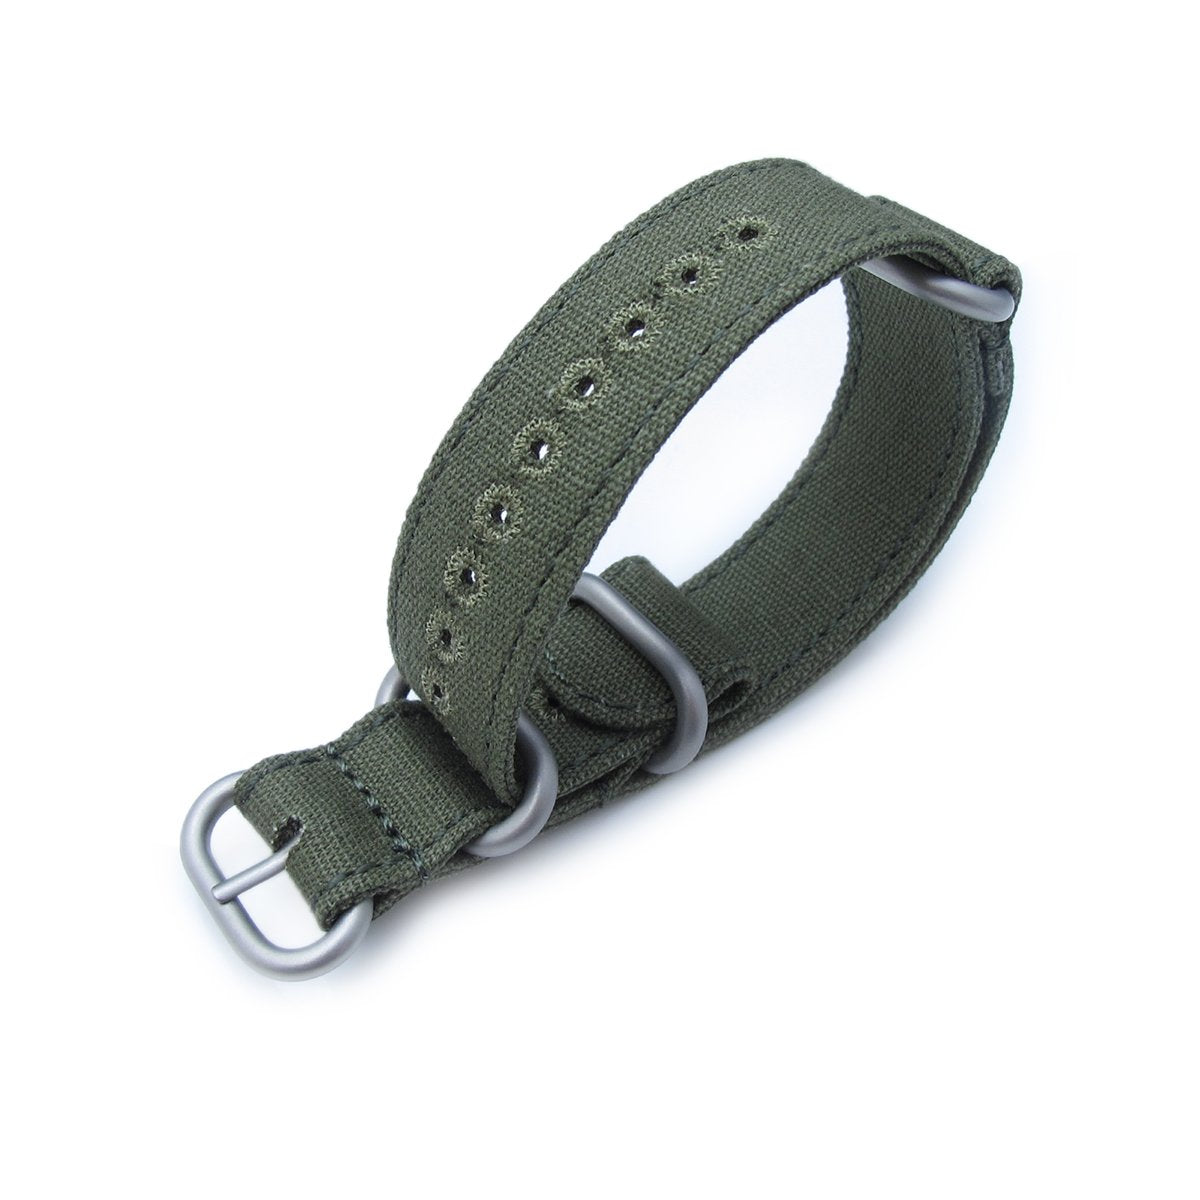 20mm MiLTAT Canvas G10 military watch strap military color with lockstitch round hole Forest Green Strapcode Watch Bands